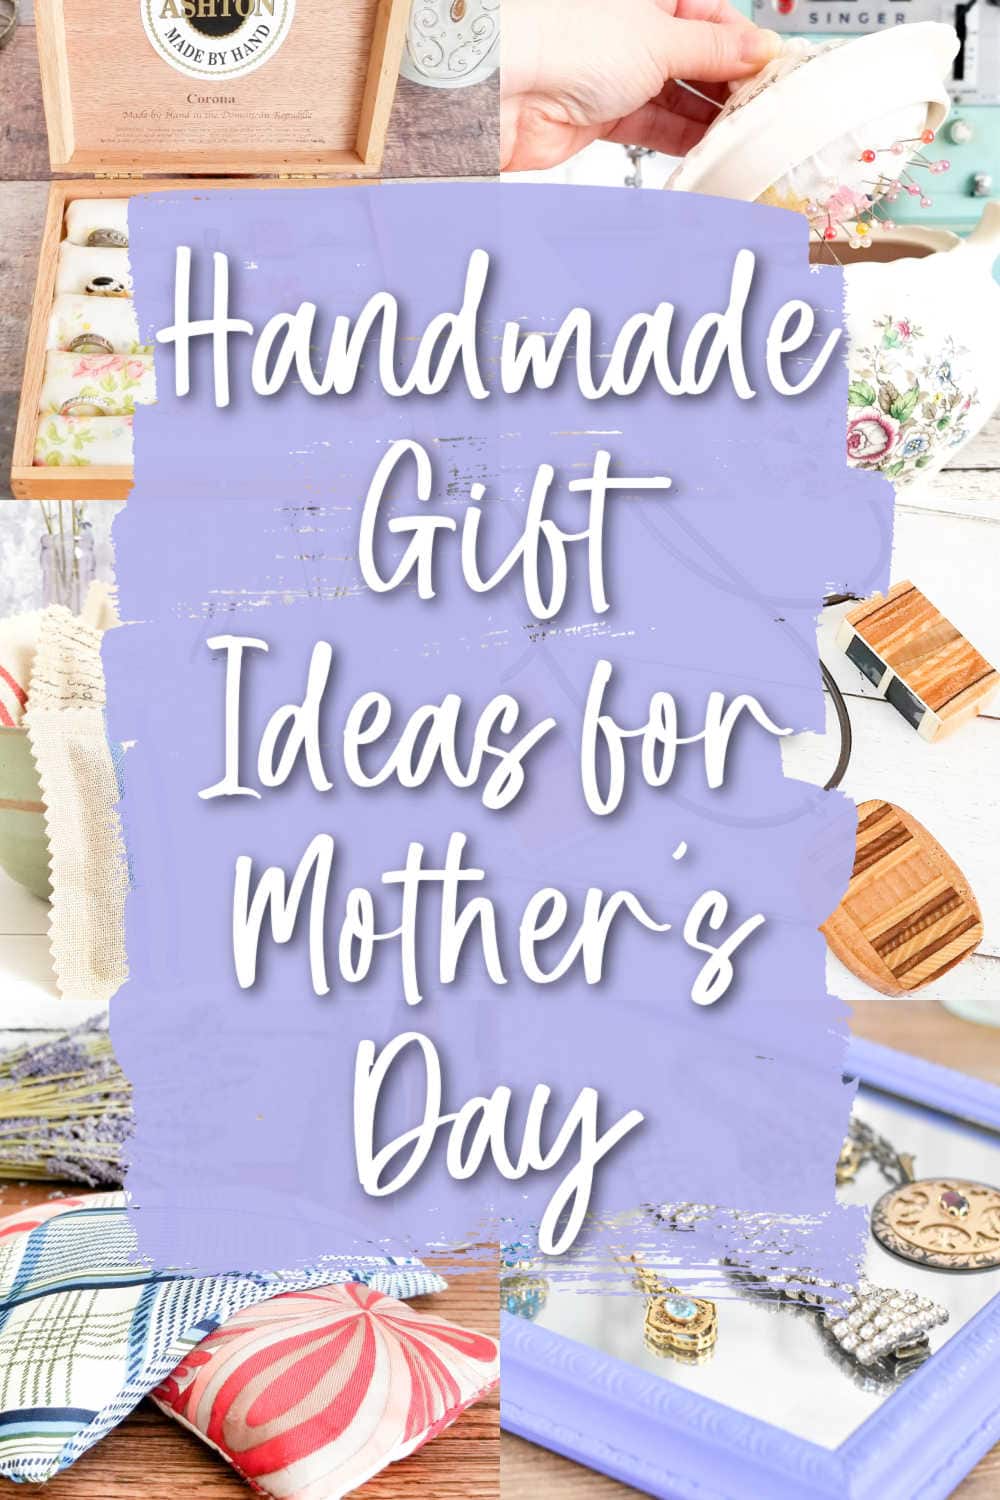 budget friendly mother's day gifts that are handmade and upcycled